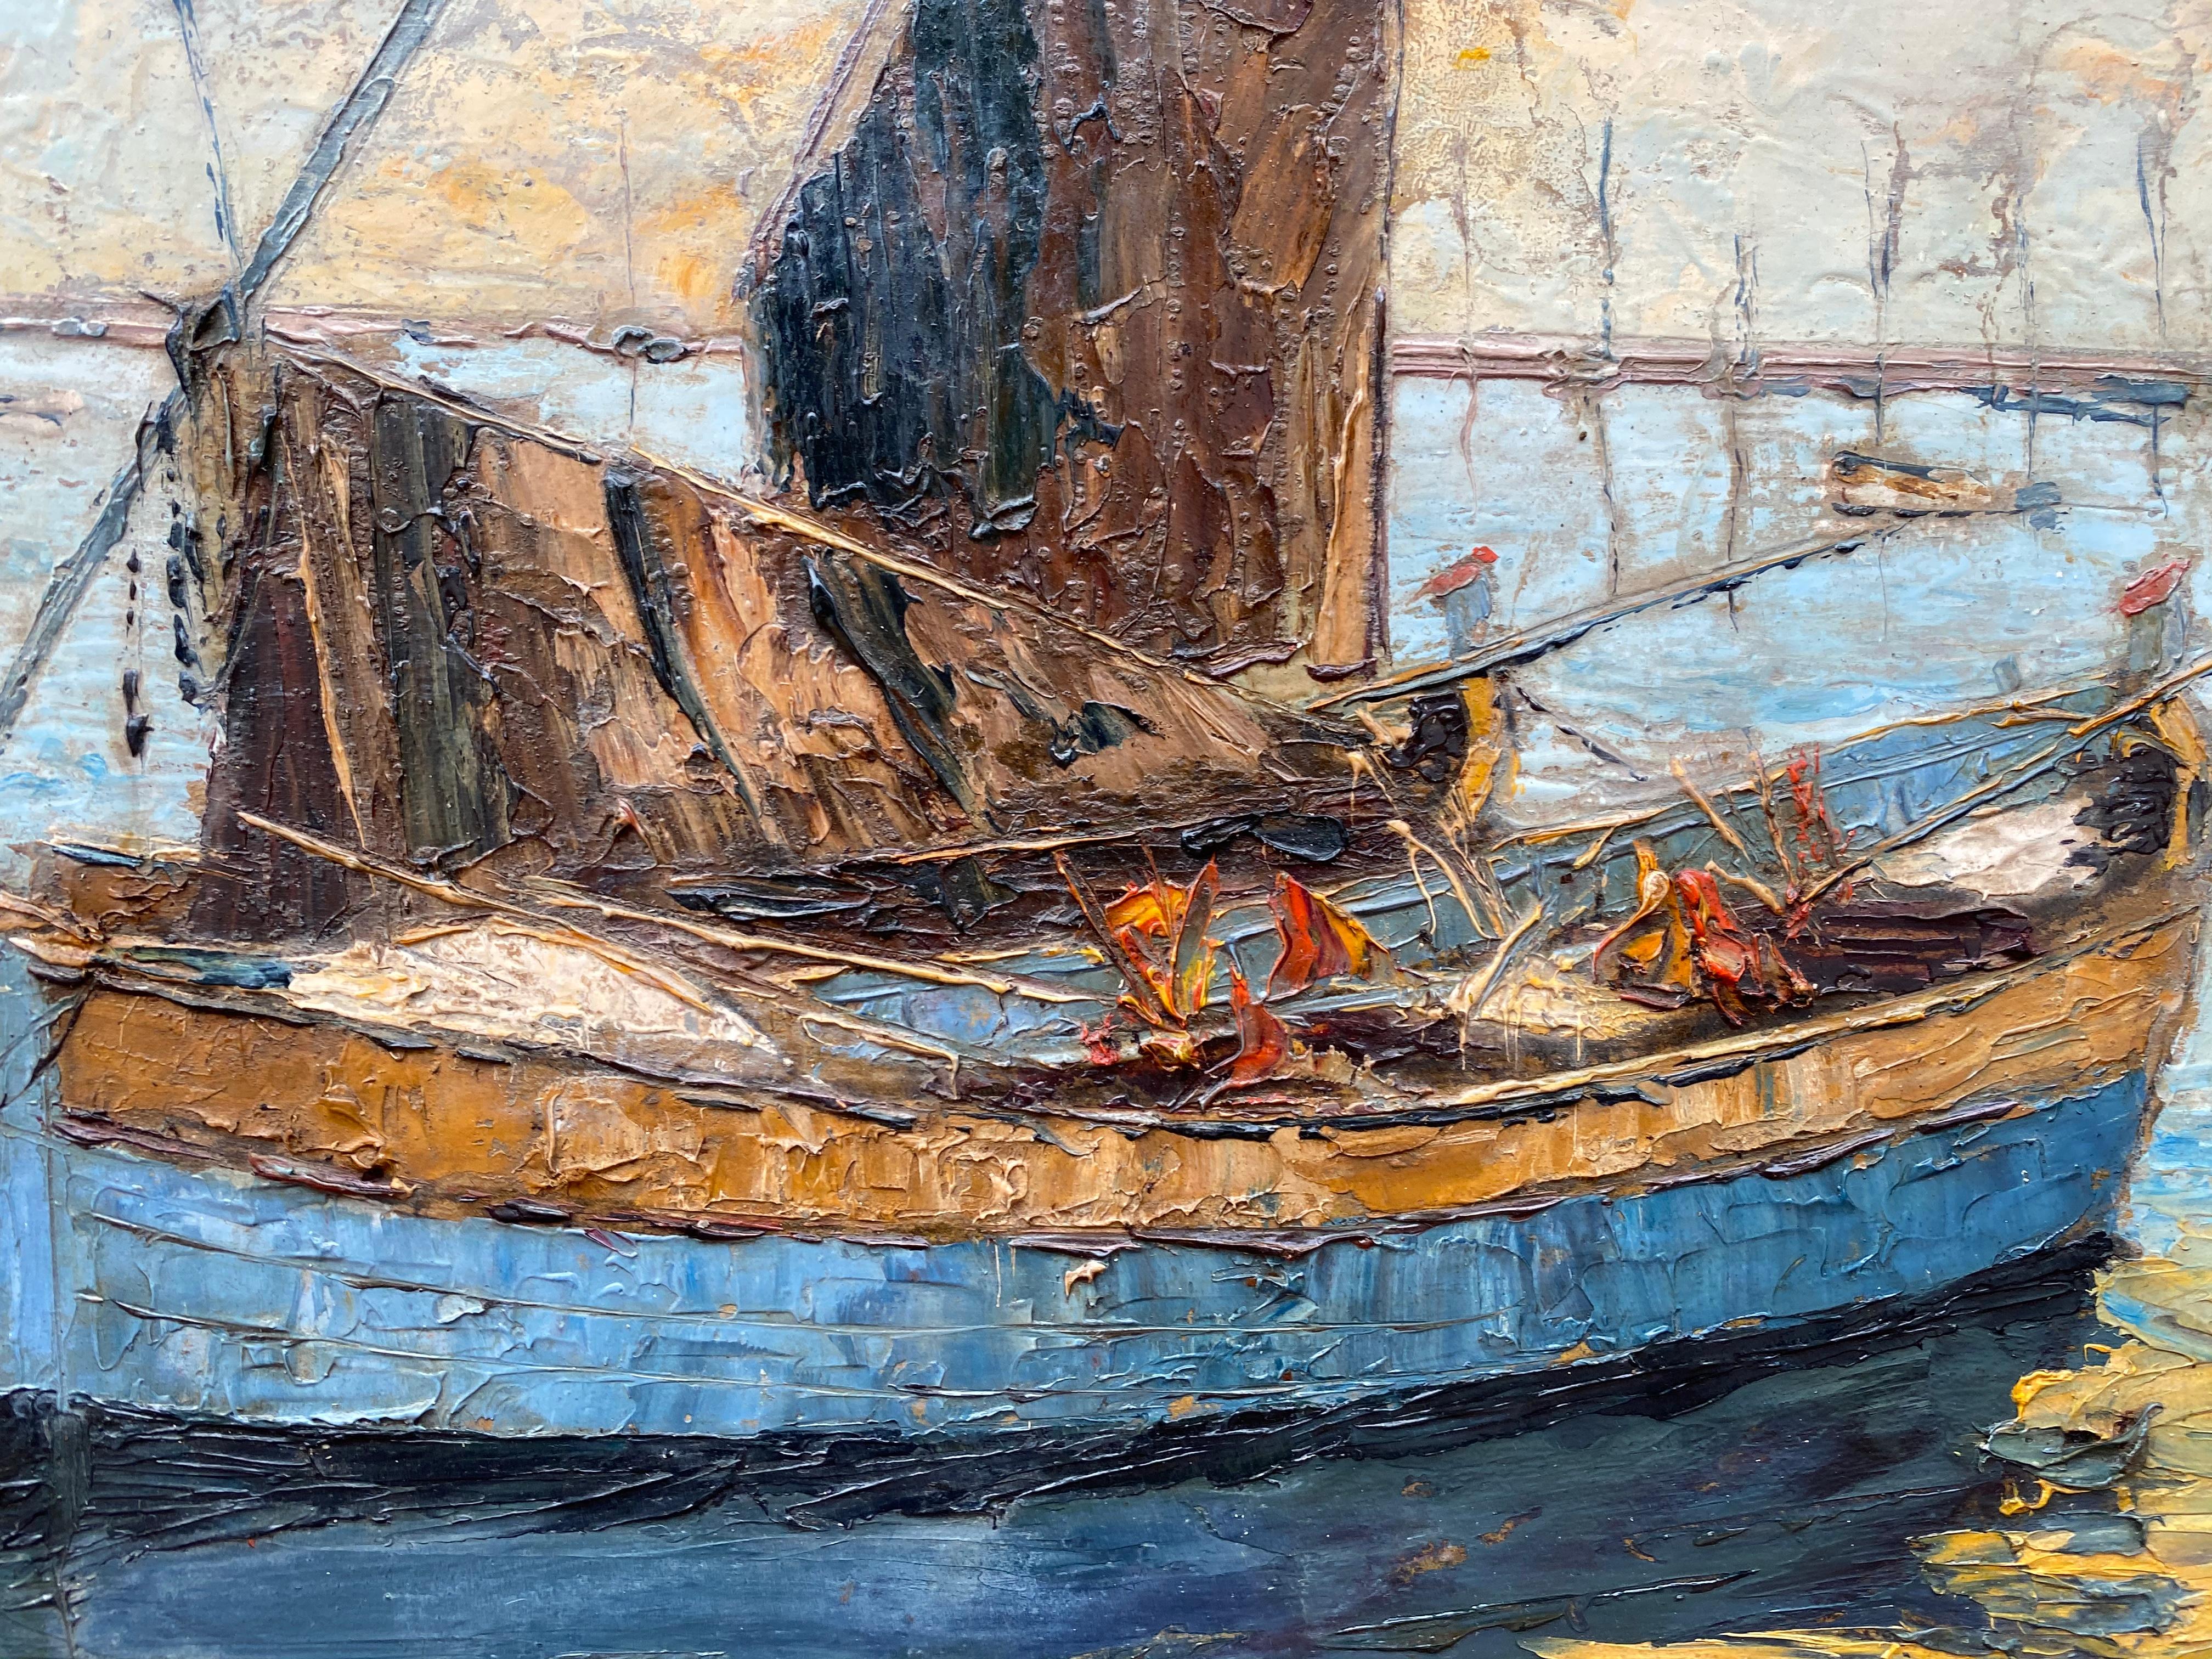 “Venice Fishing Boats” - Post-Impressionist Painting by Jean Corniche